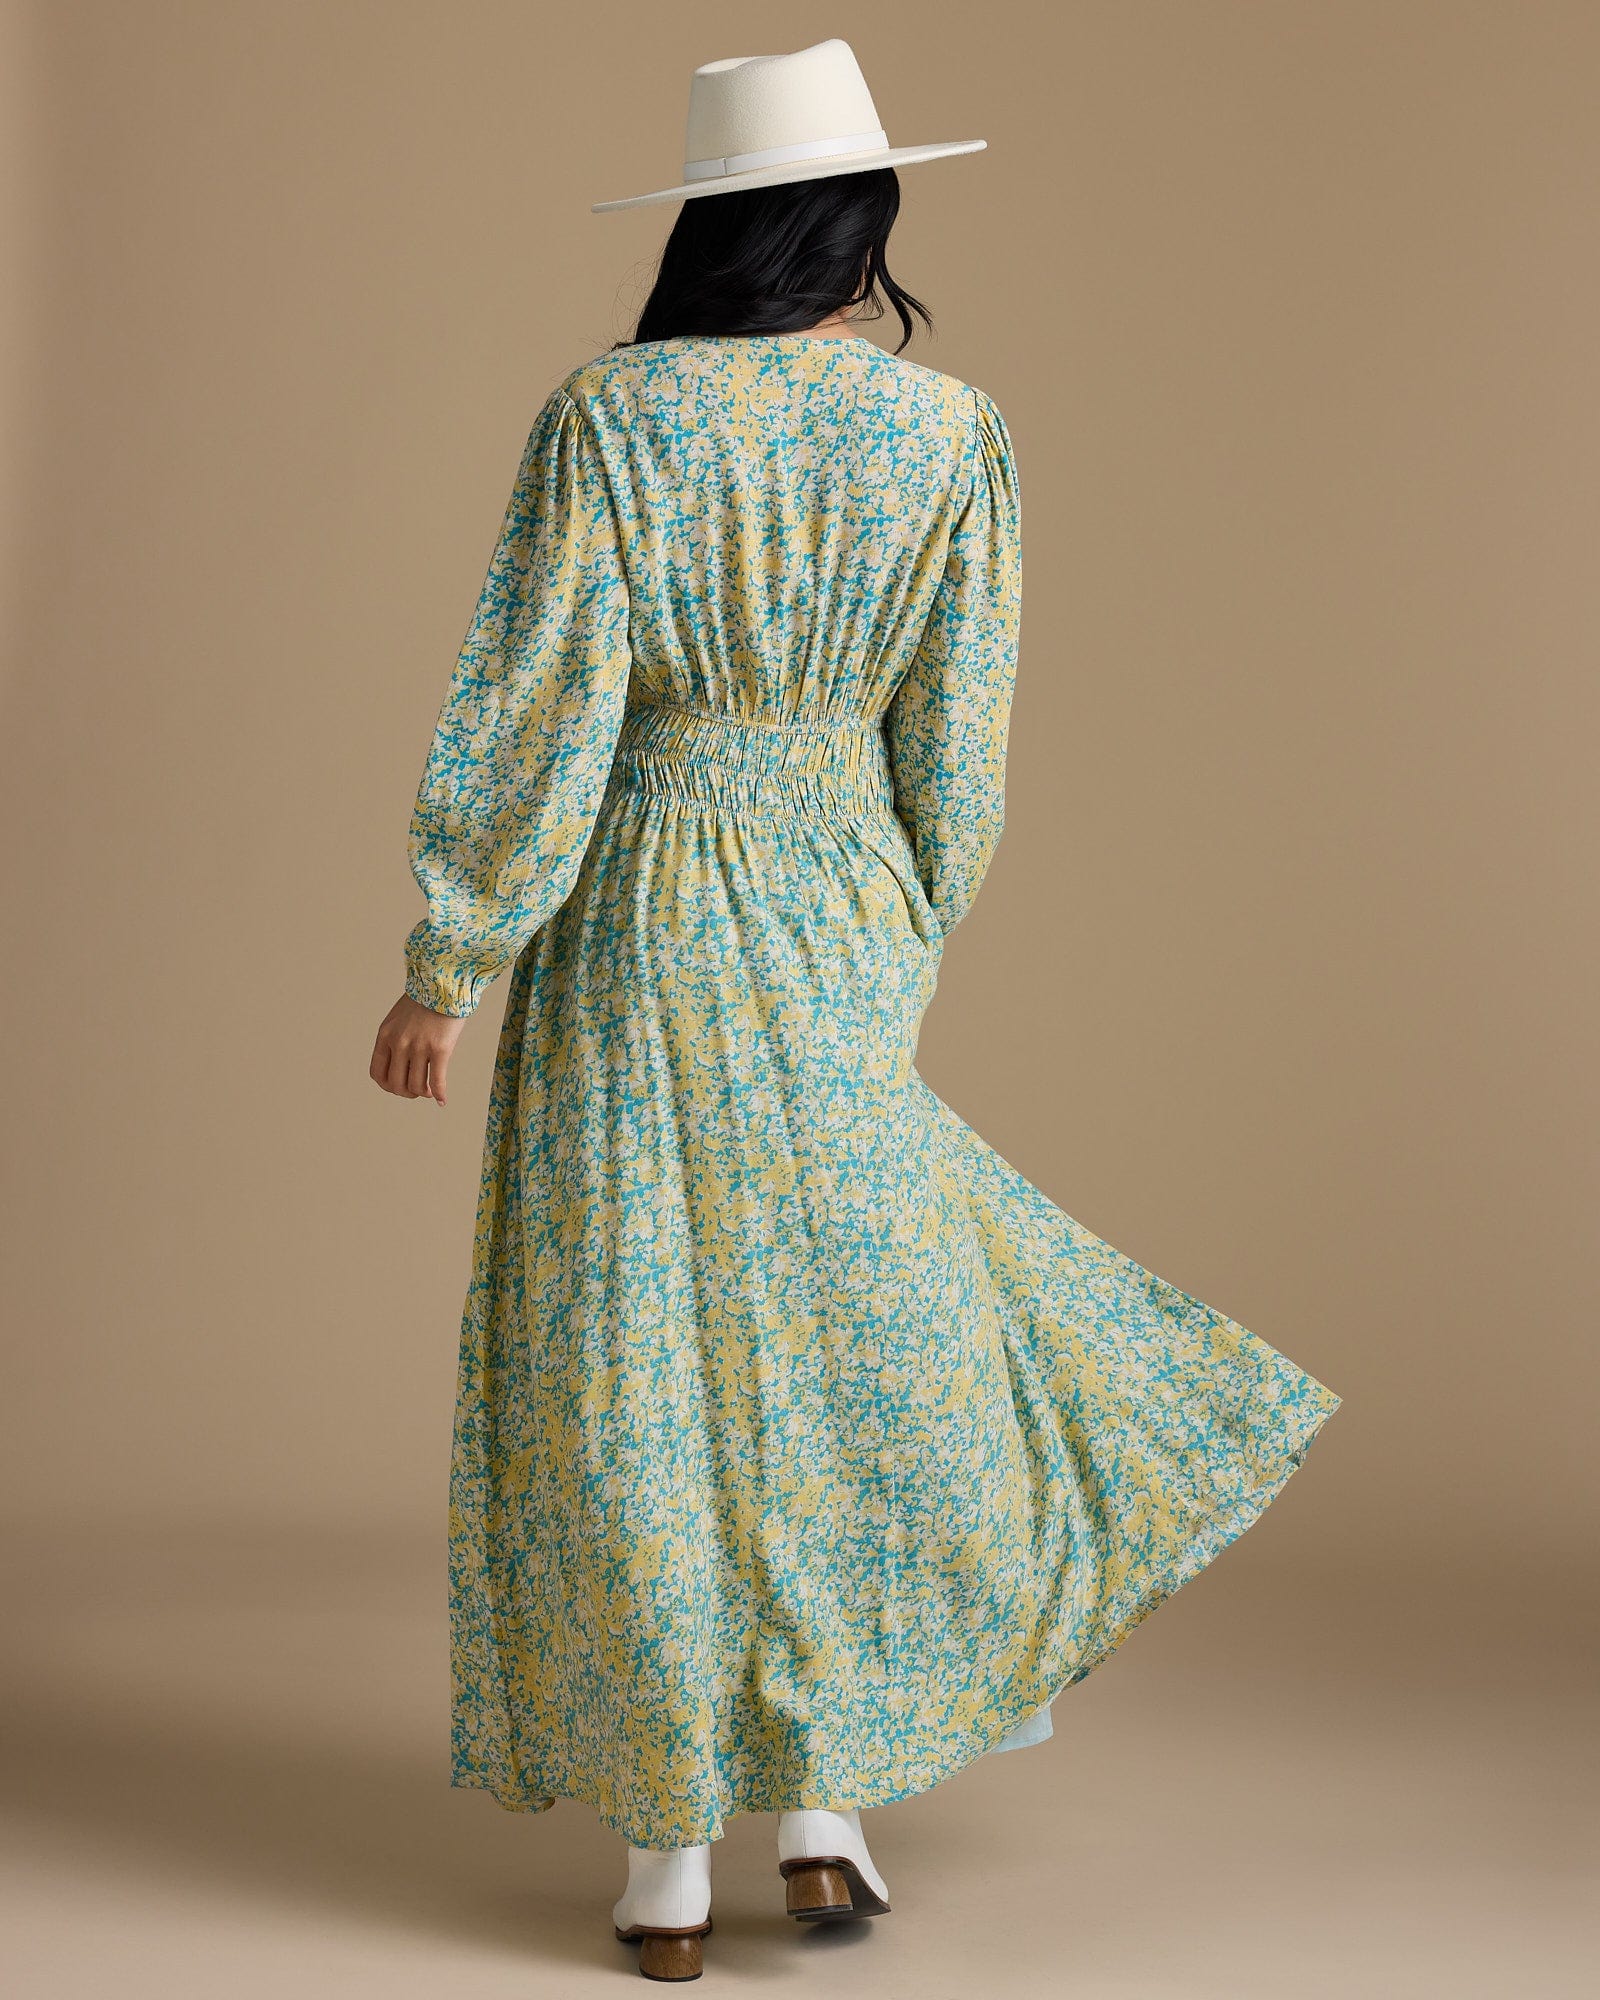 Woman in a long sleeve, maxi length, yellow and green floral print dress